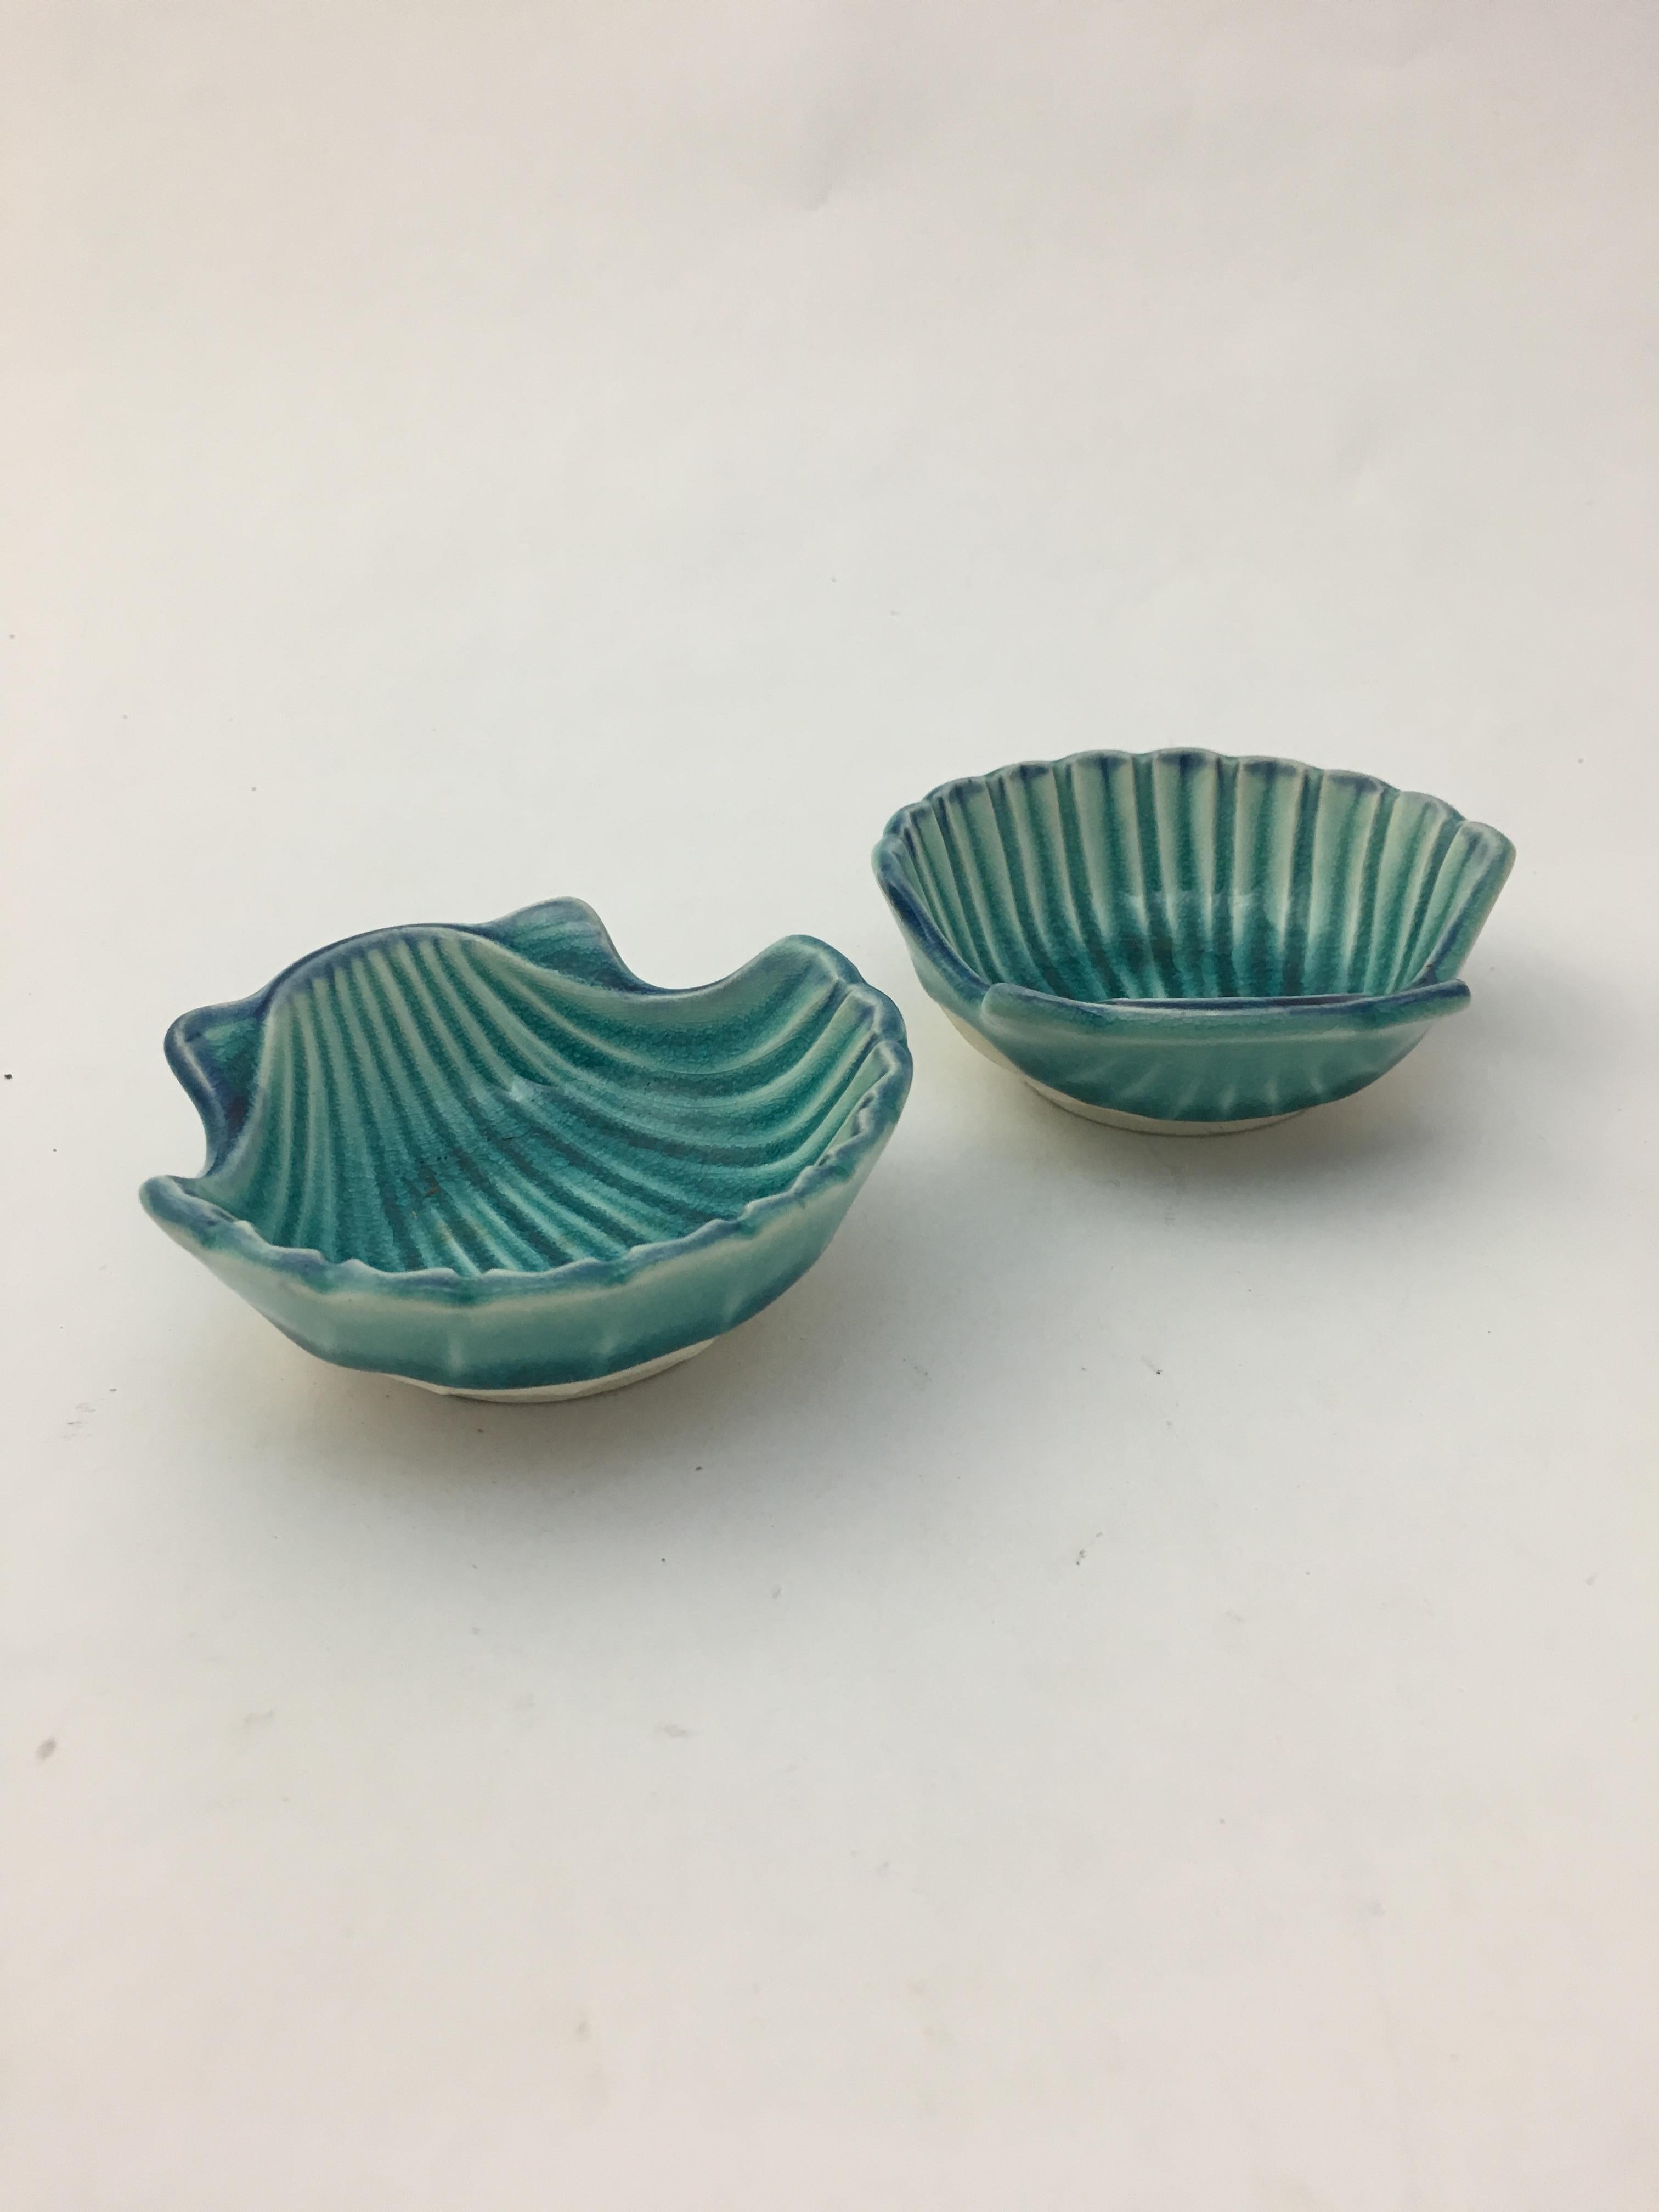 Hollywood Regency 1960s Azure Blue Japanese Scallop Shell Bowls